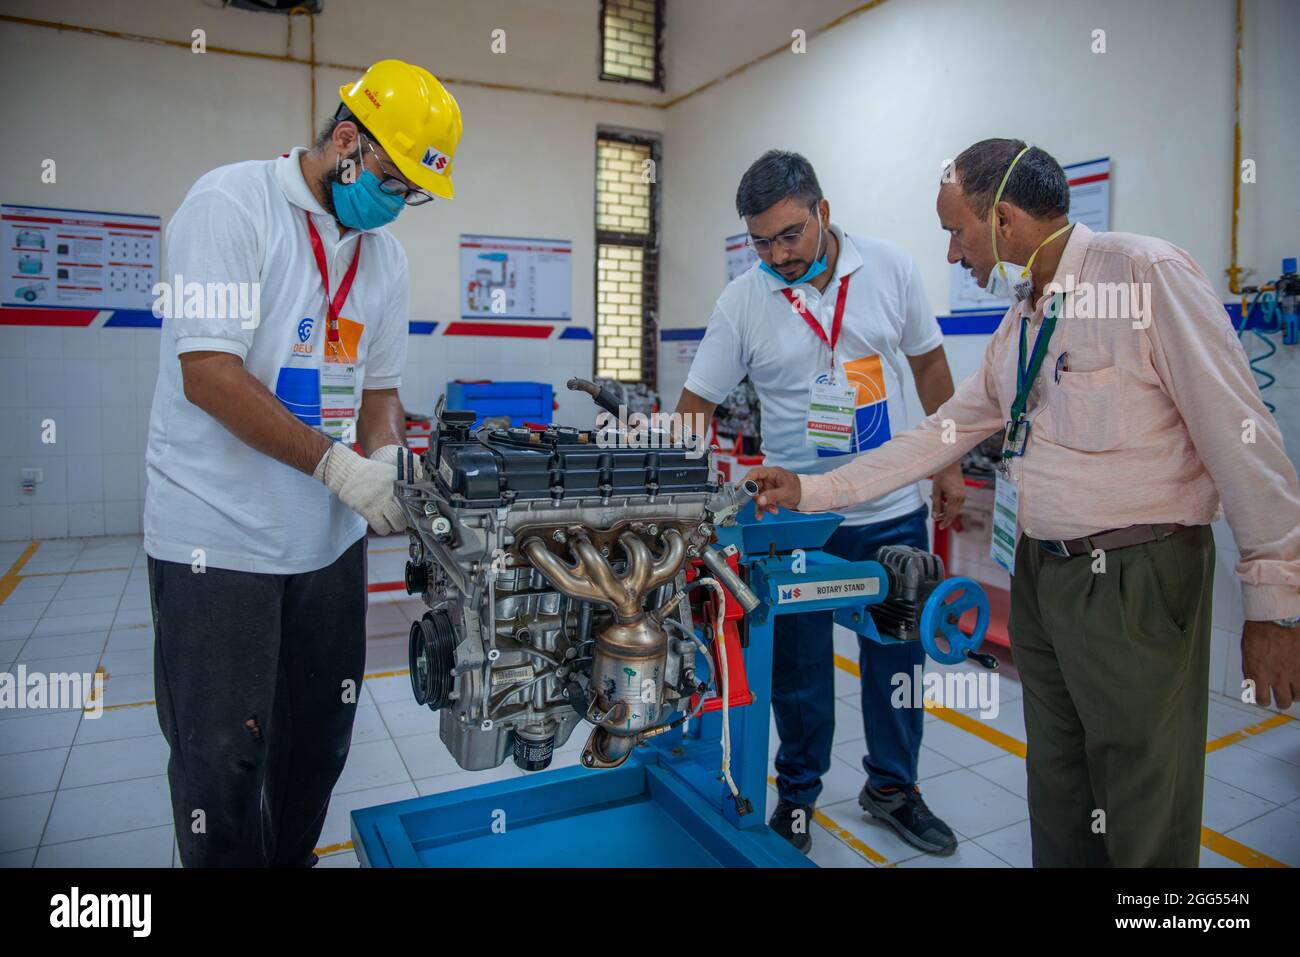 Industrial Student takes part during the Skill Competition of Automobile Technology at the Industrial Training Institutes in Nizamuddin, New Delhi.Delhi Skill and Entrepreneurship University conducts Delhi’s inaugural state level competitions for the final selection of candidates for the regional rounds of World Skills Shanghai 2022.  Delhi education minister Manish Sisodia said “Skill University will prepare future entrepreneurs'. (Photo by Pradeep Gaur / SOPA Images/Sipa USA) Stock Photo